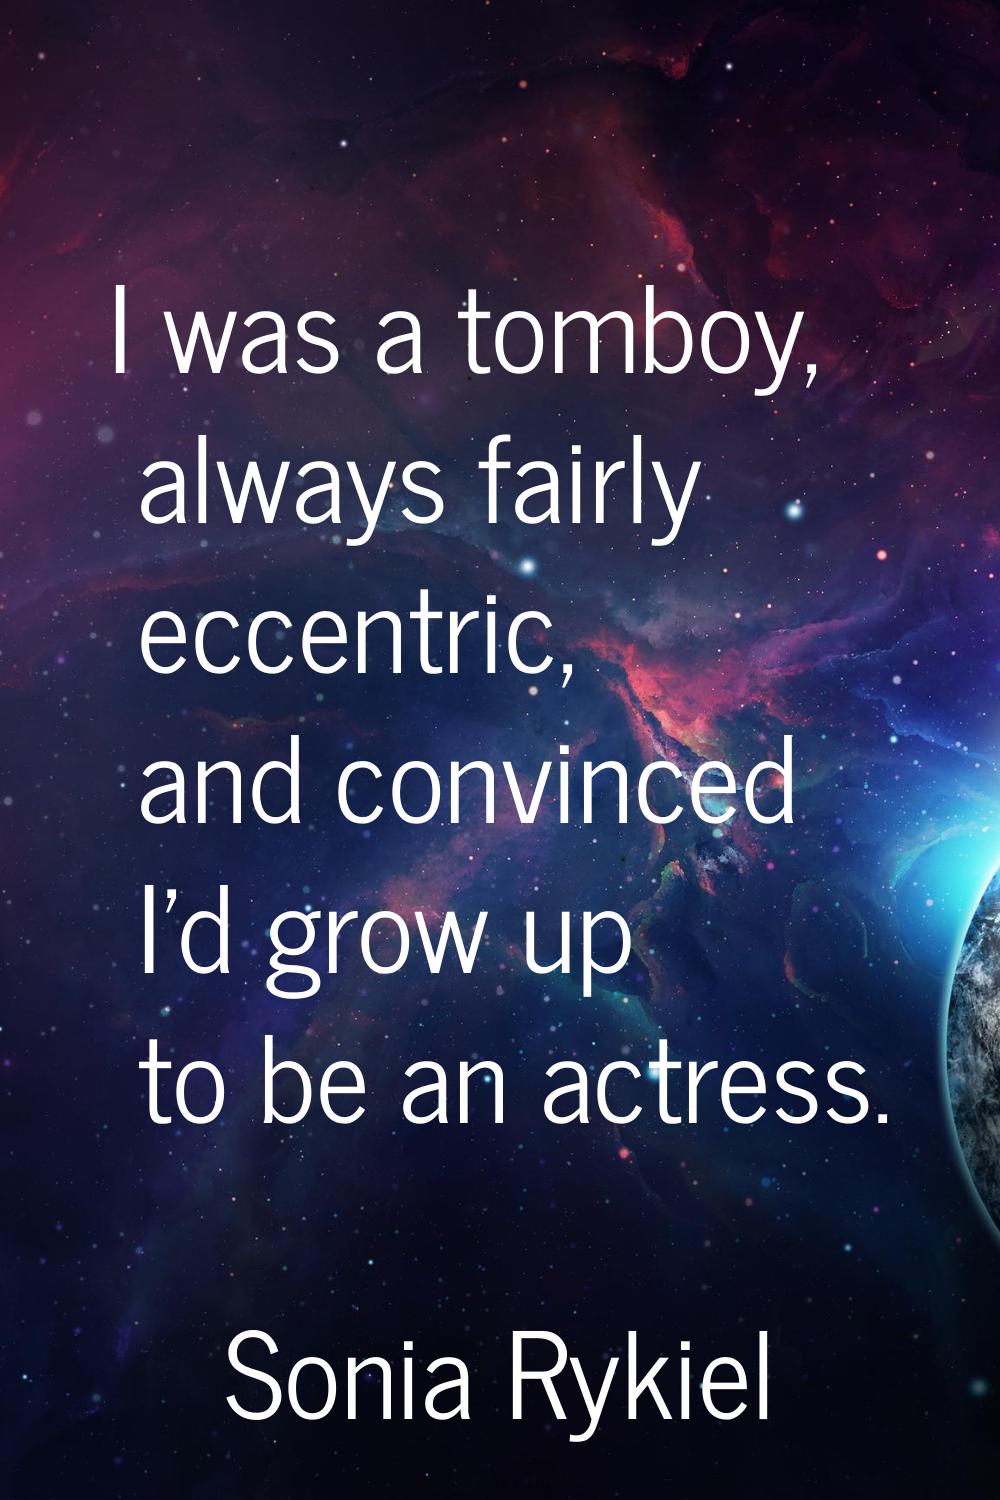 I was a tomboy, always fairly eccentric, and convinced I'd grow up to be an actress.